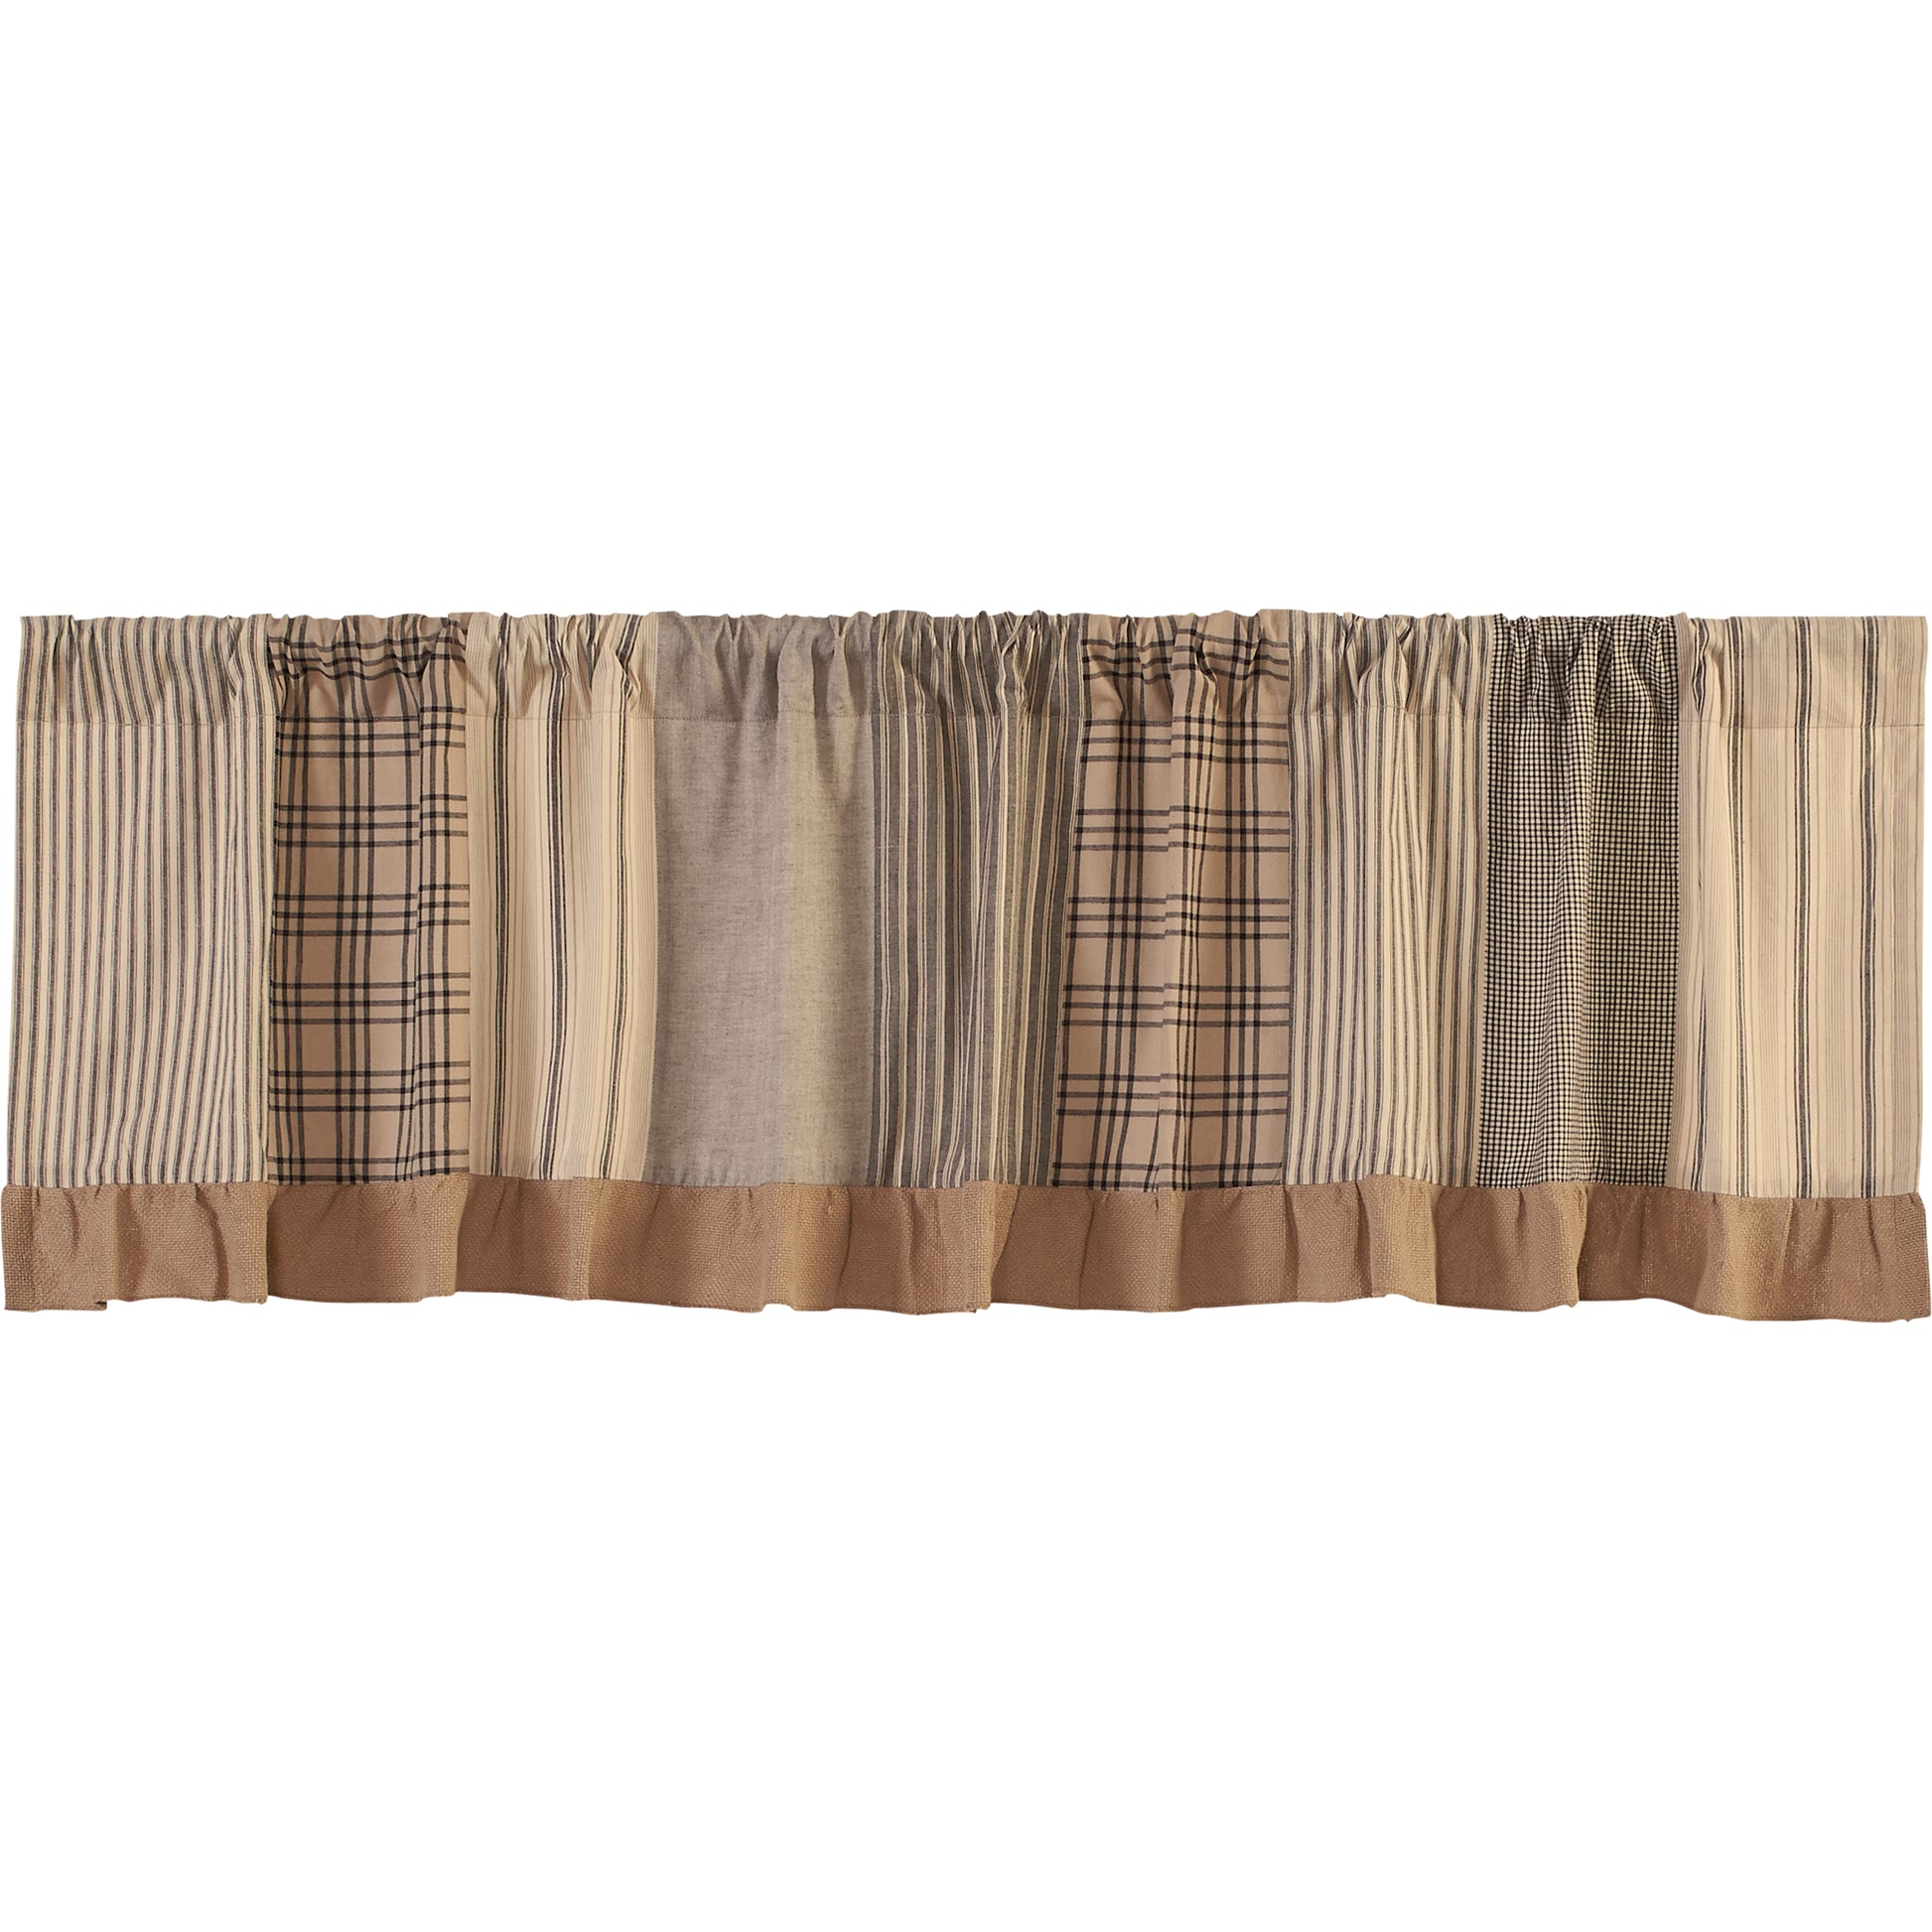 38040-Sawyer-Mill-Charcoal-Patchwork-Valance-19x72-image-4